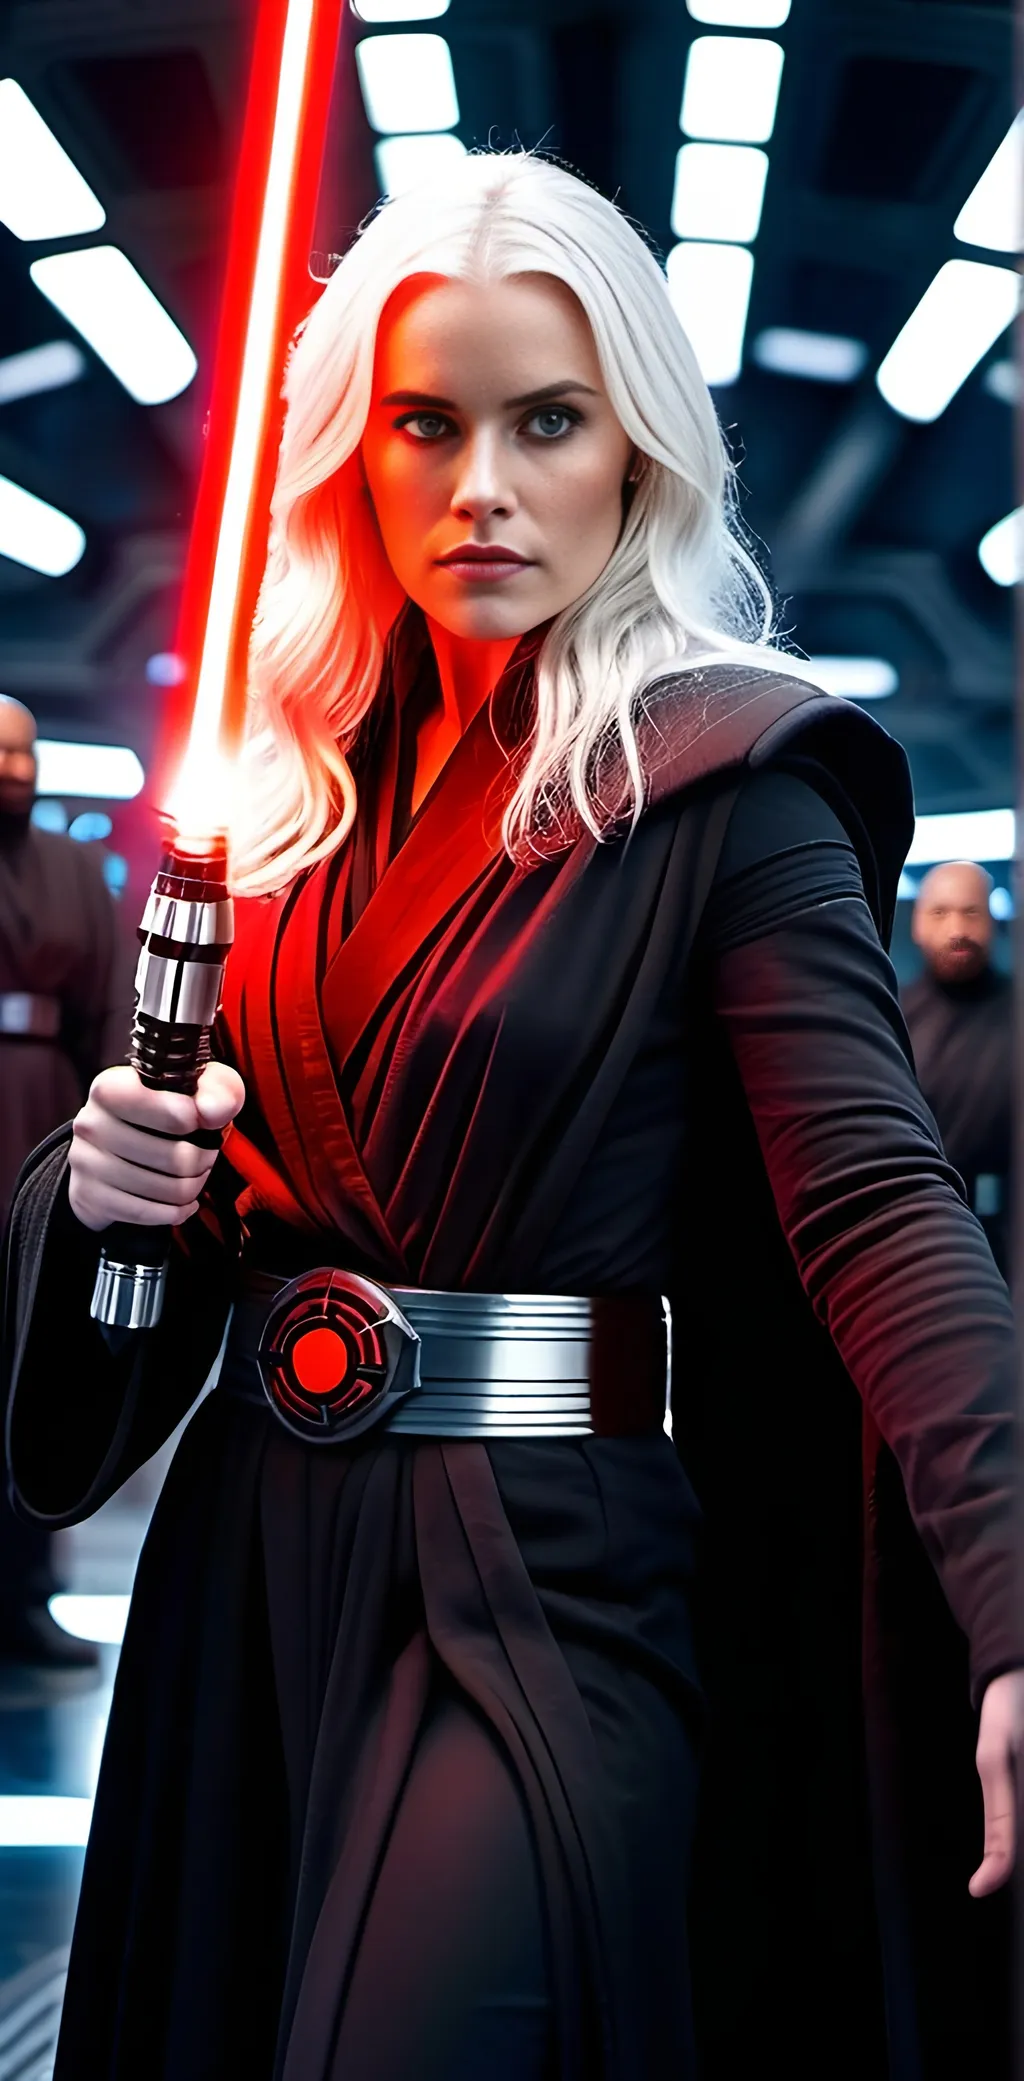 Prompt: Photo of an actress as a dark Jedi Knight (age 25) with long flowing white hair, red contact lenses, intricately beautiful face, dressed in black robes and slacks, black boots, and a utility belt with metallic tools, holding a glowing red lightsaber, standing ready for battle, elaborate space ship film set, realistic, high-res photo, natural skin tone, professional, cinematic